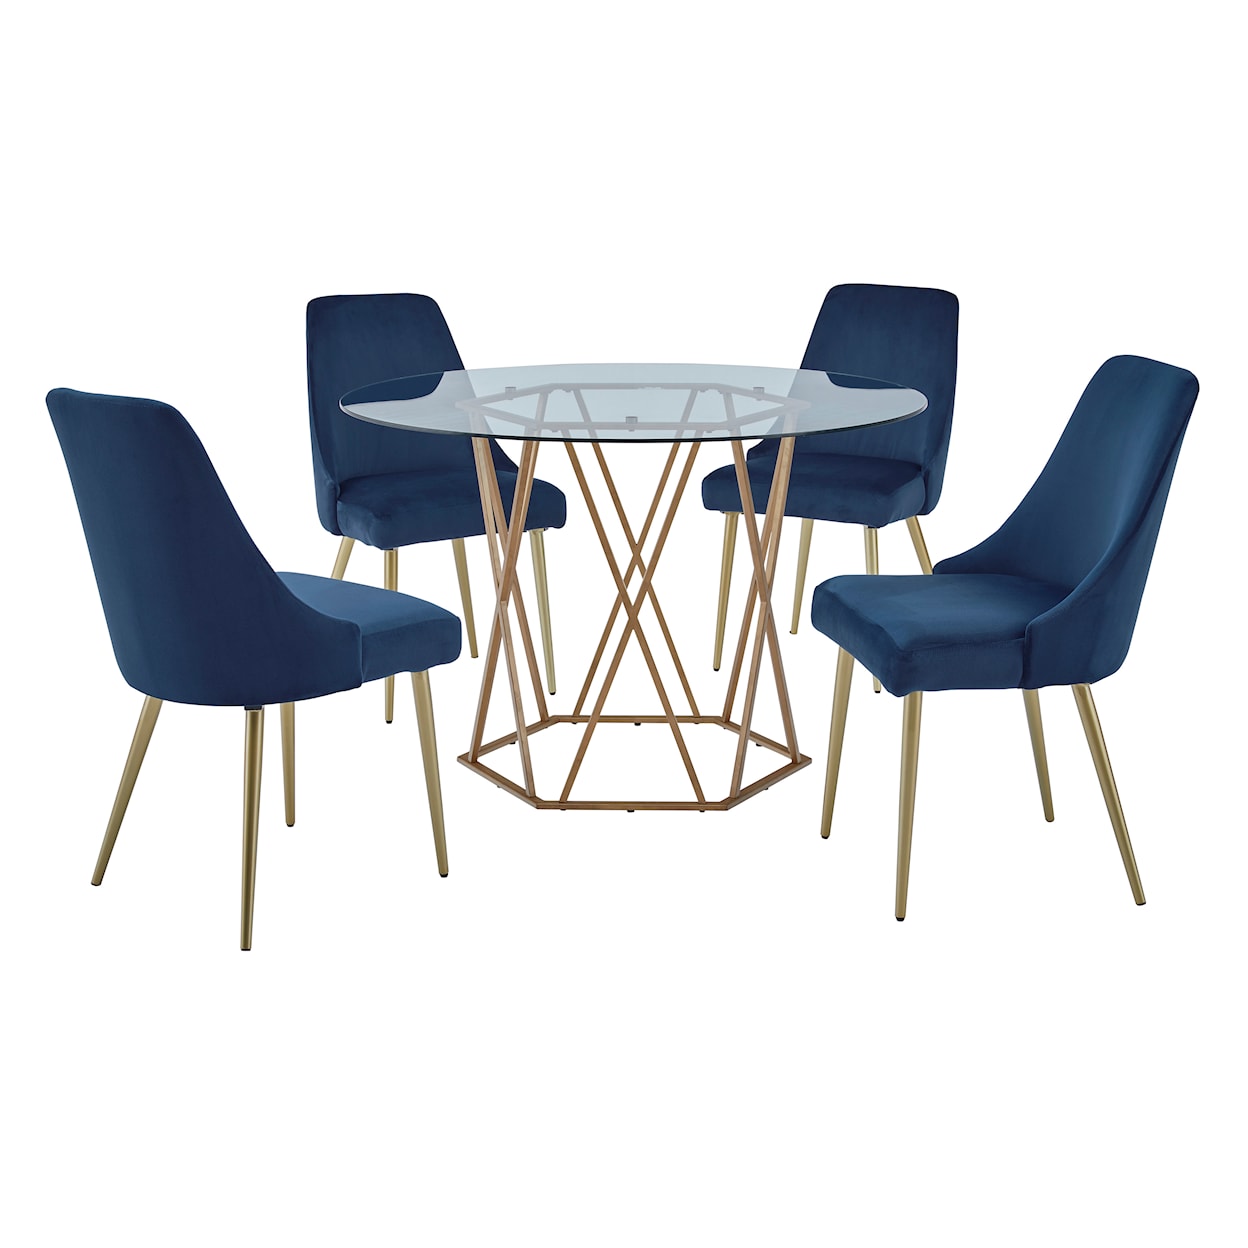 Signature Design by Ashley Wynora Dining Chair